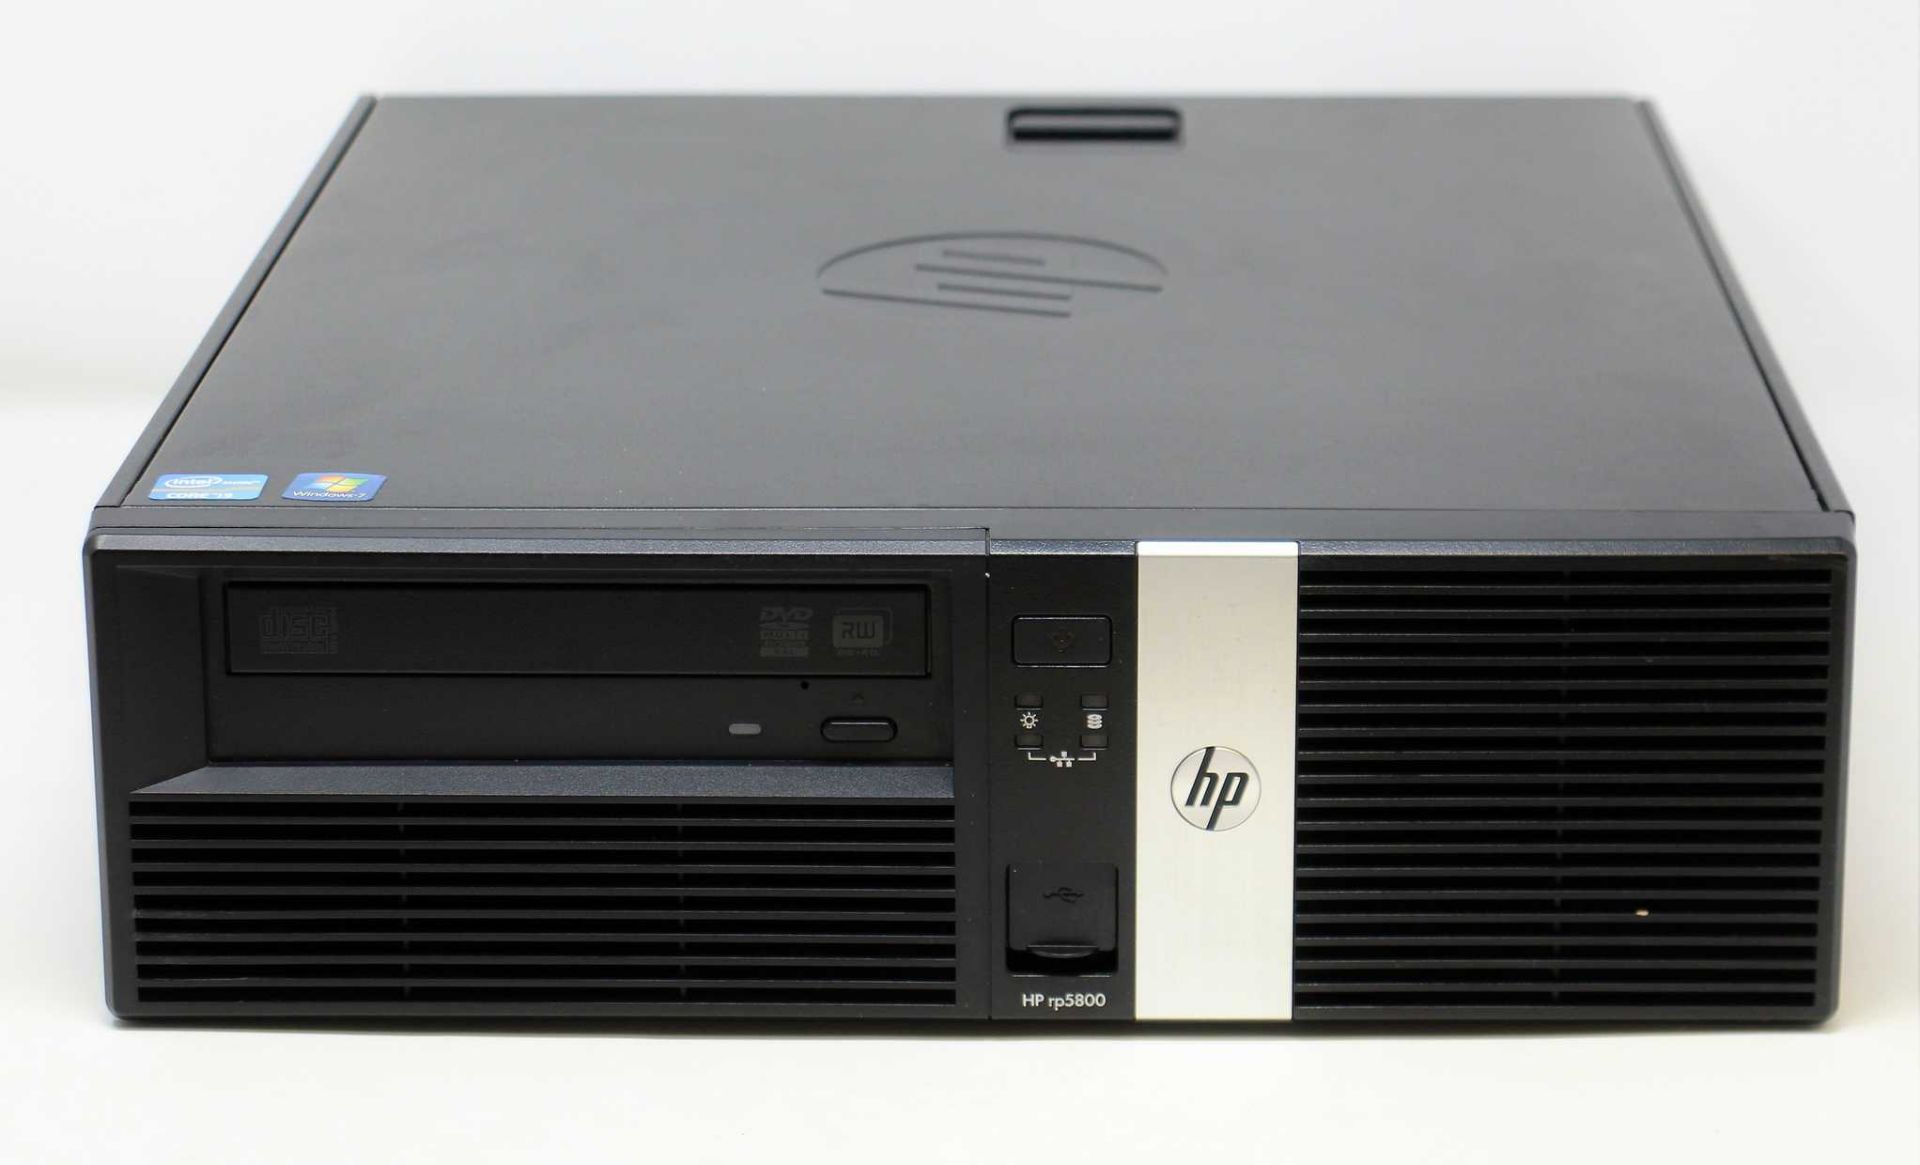 A pre-owned HP rp5800 Retail System with Intel i3 3.3GHz, 8GB RAM, 500GB HDD running Windows 7 COA.